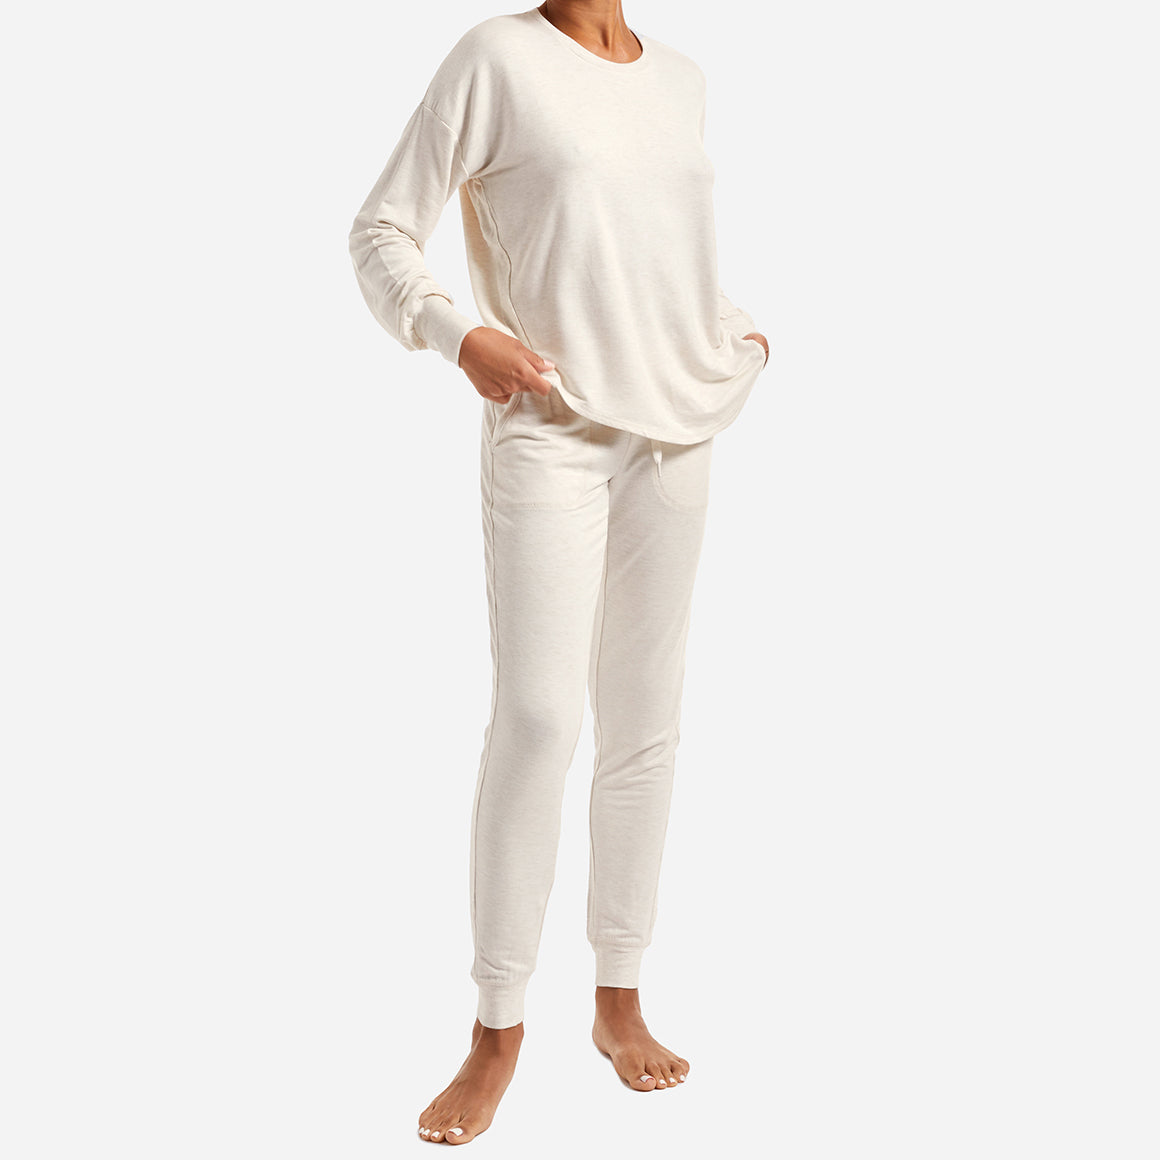 These cozy pants feature a slim fit and an elastic waistband with an adjustable drawstring to provide a customized and secure fit. Detailed with side pockets and ribbed ankle cuffs, these stylish lounge pants are a wind-down must have.